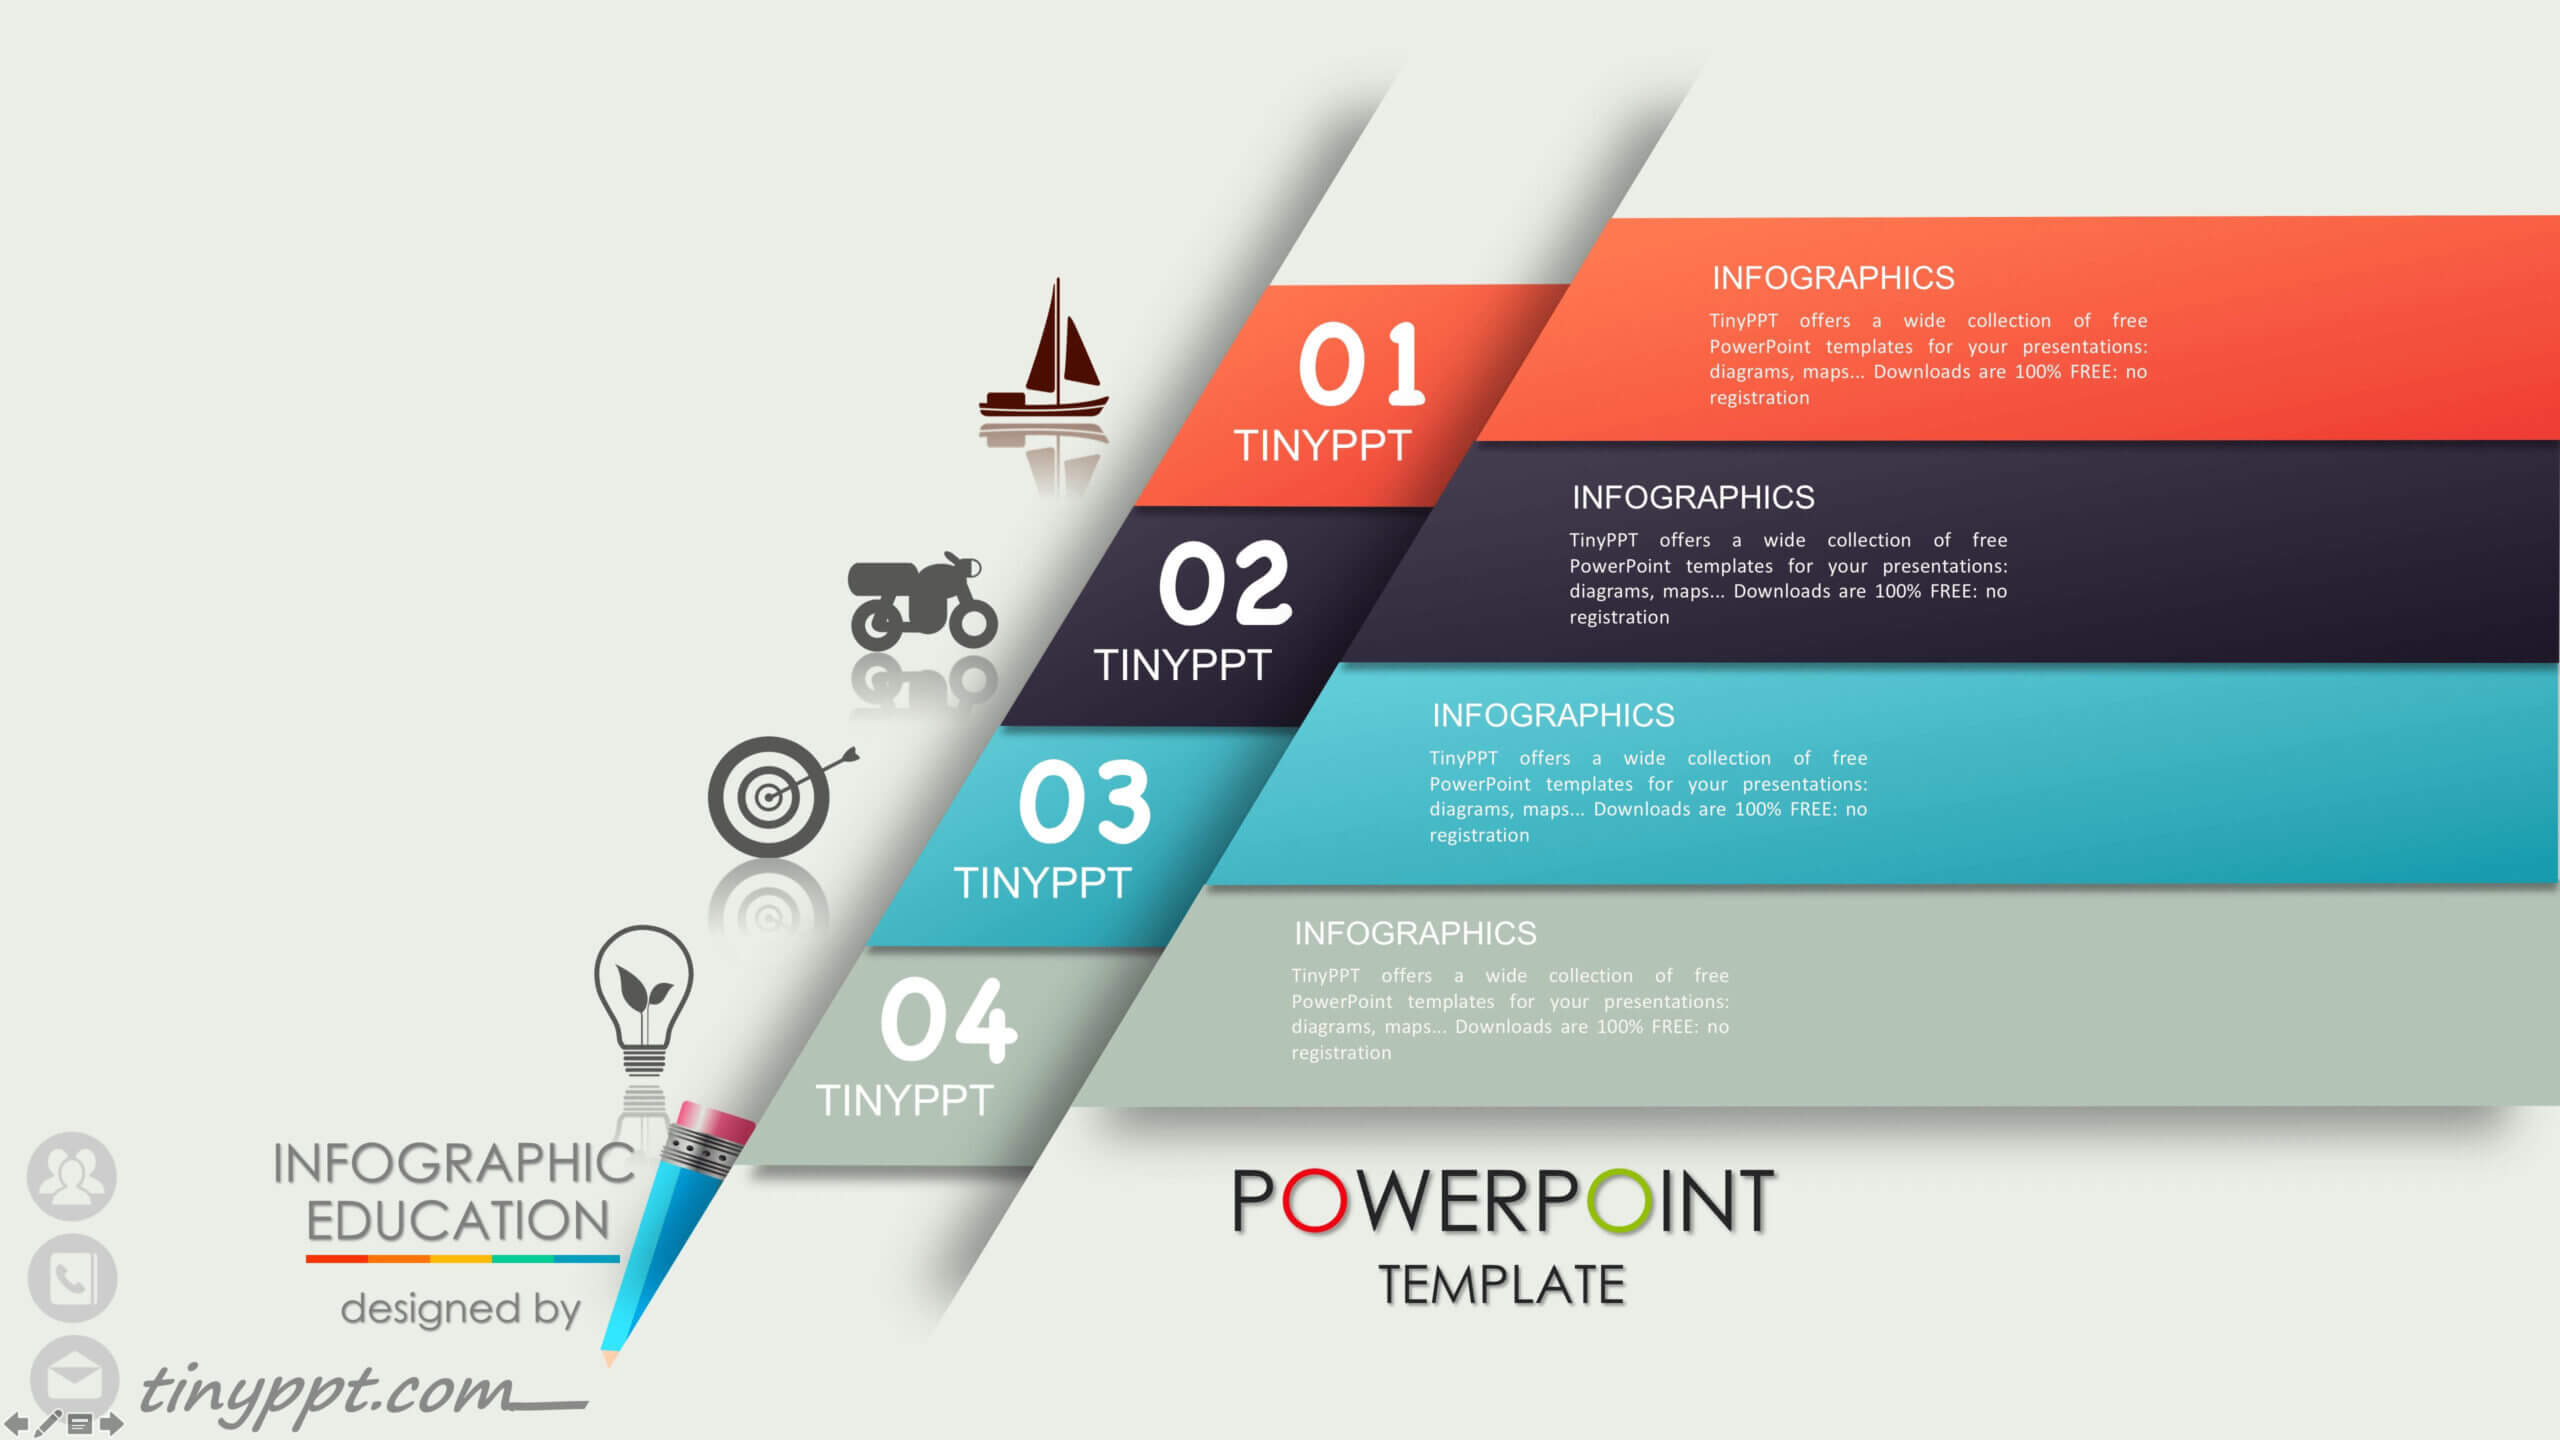 Fresh Business Template Powerpoint Free | Desain With Regard To Powerpoint Sample Templates Free Download